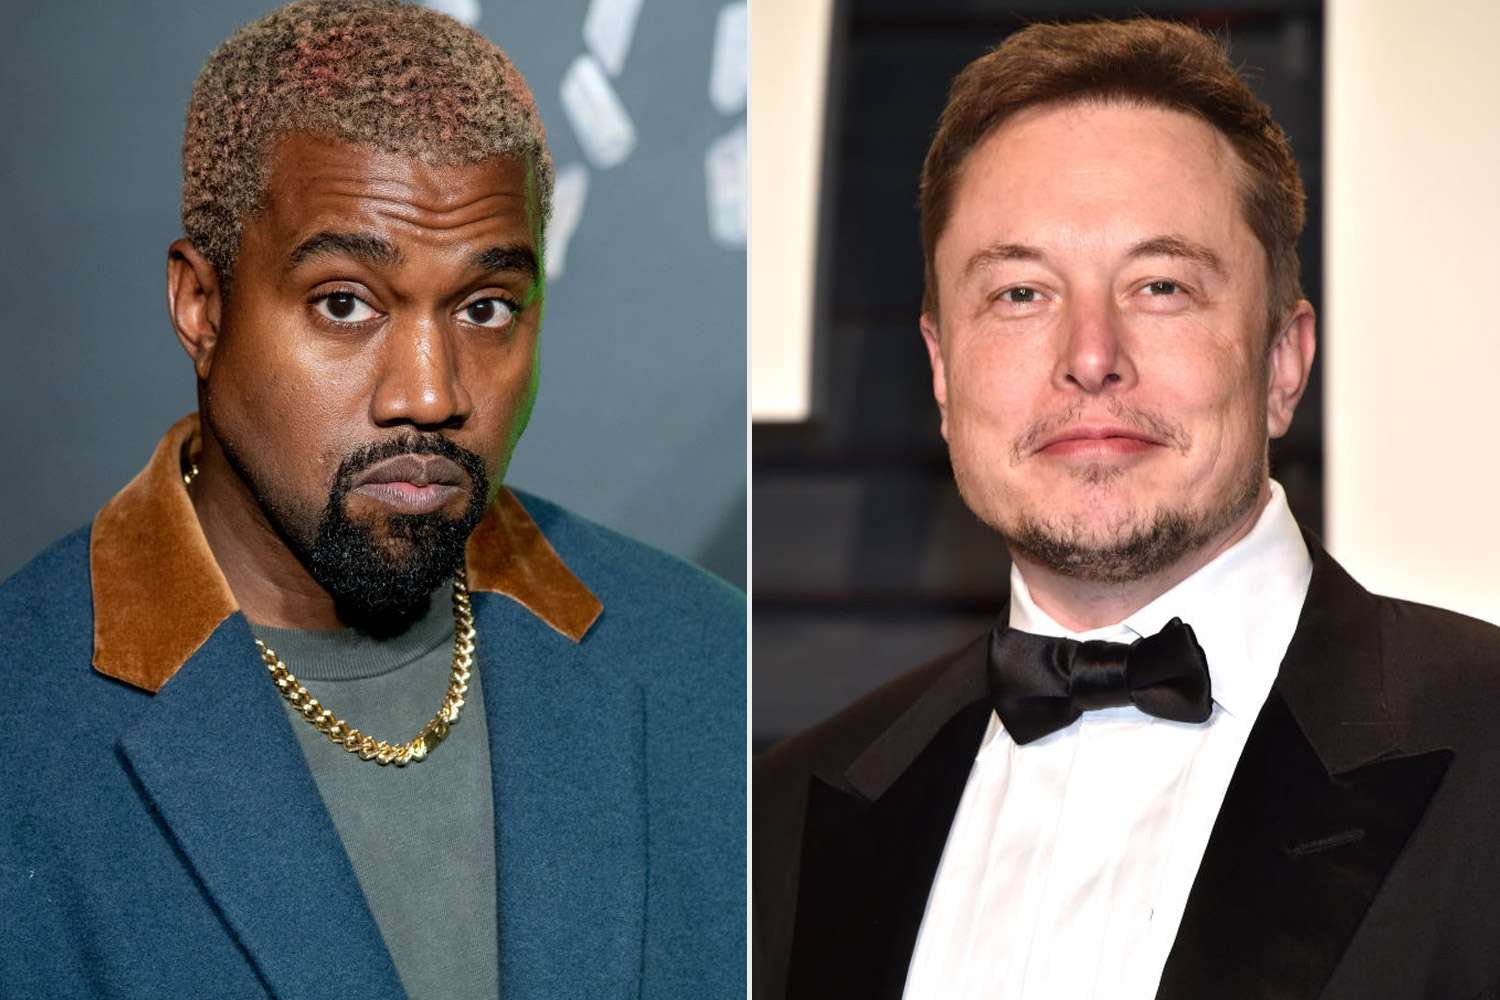 Kanye West's Twitter Account Reinstated, According to Elon Musk, Before He Was Named CEO